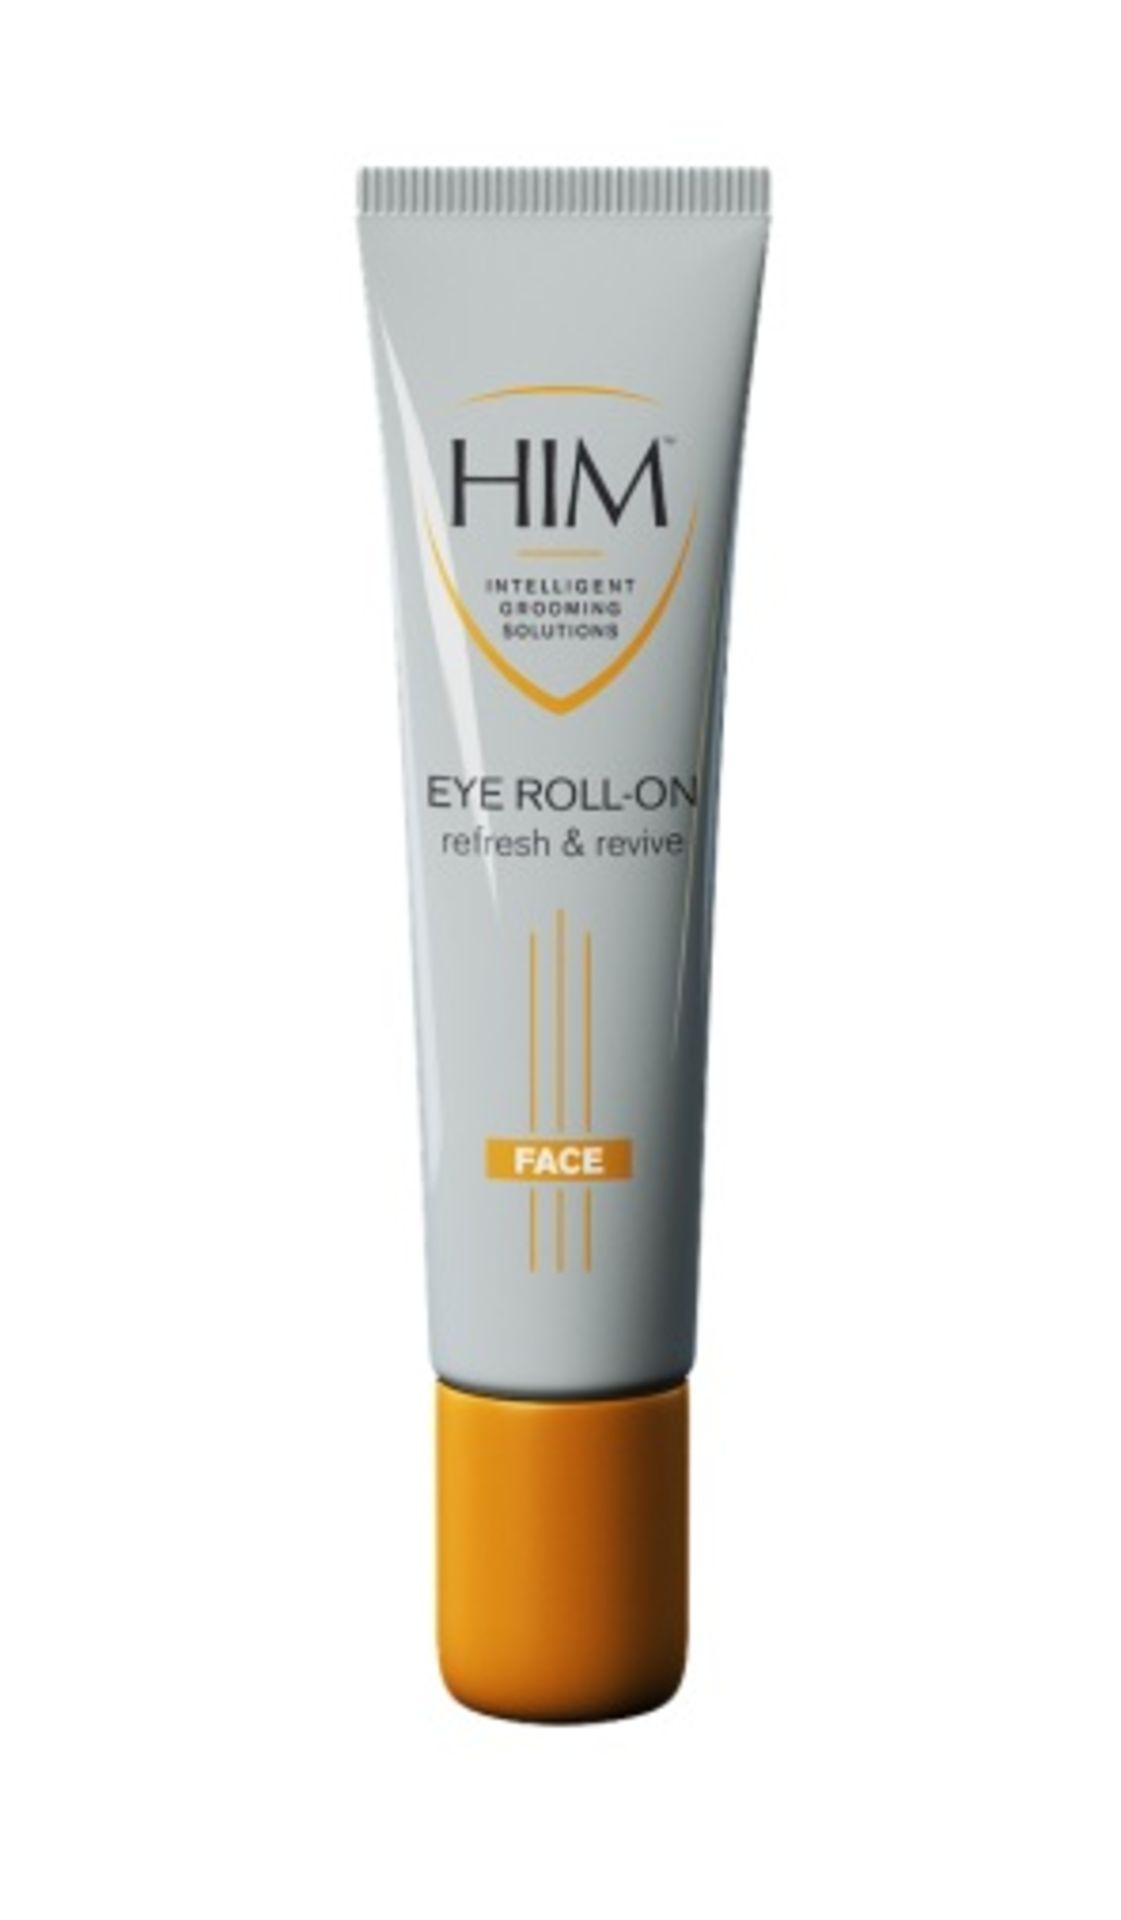 120 x HIM Intelligent Grooming Solutions Products - ASSORTED COLLECTION - Brand New Stock - Hydrate, - Image 4 of 17